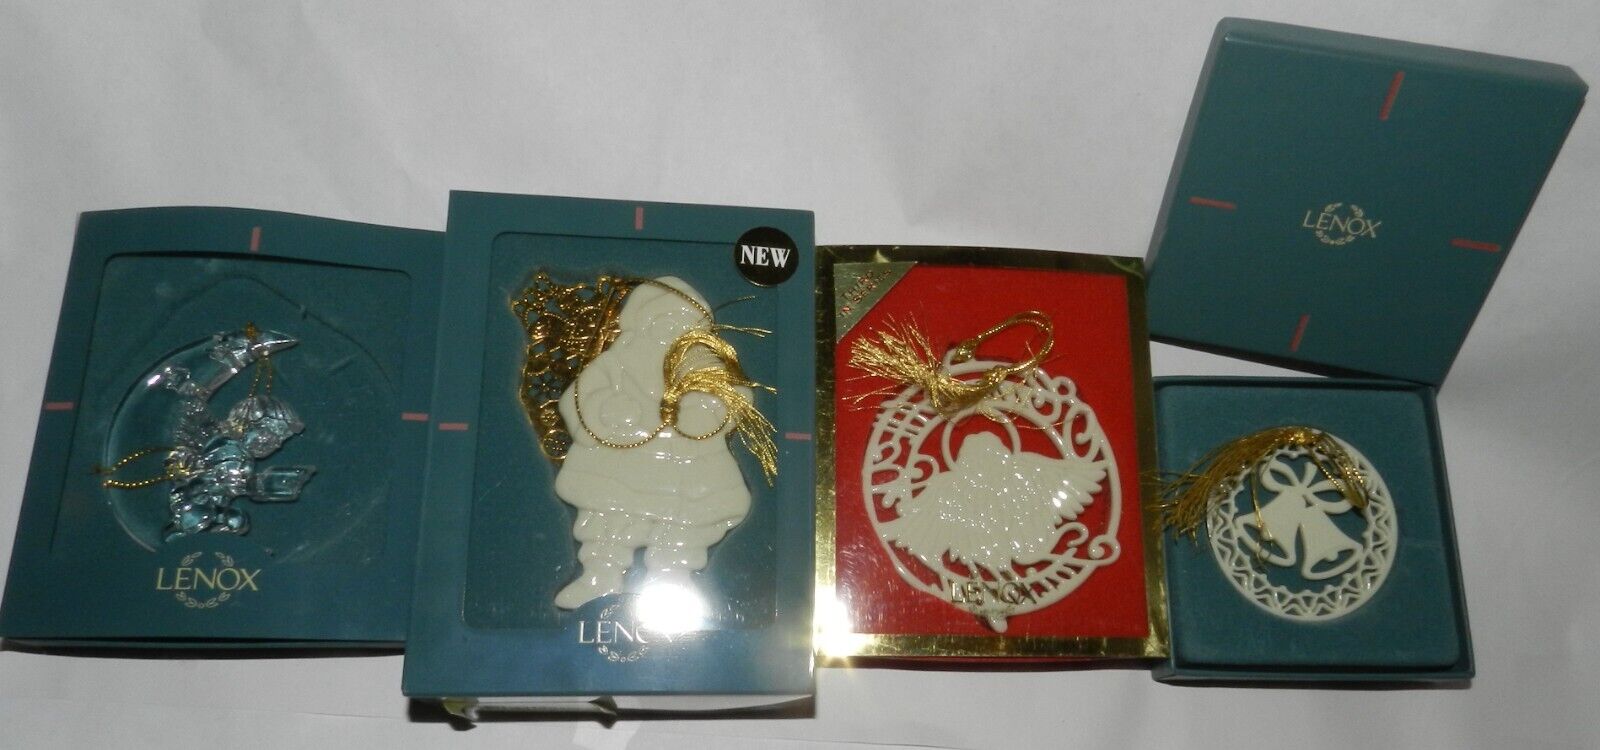 Lot of 4 Lenox Crystal + China Christmas Ornaments  - Santa with Pack, Doves, Ch